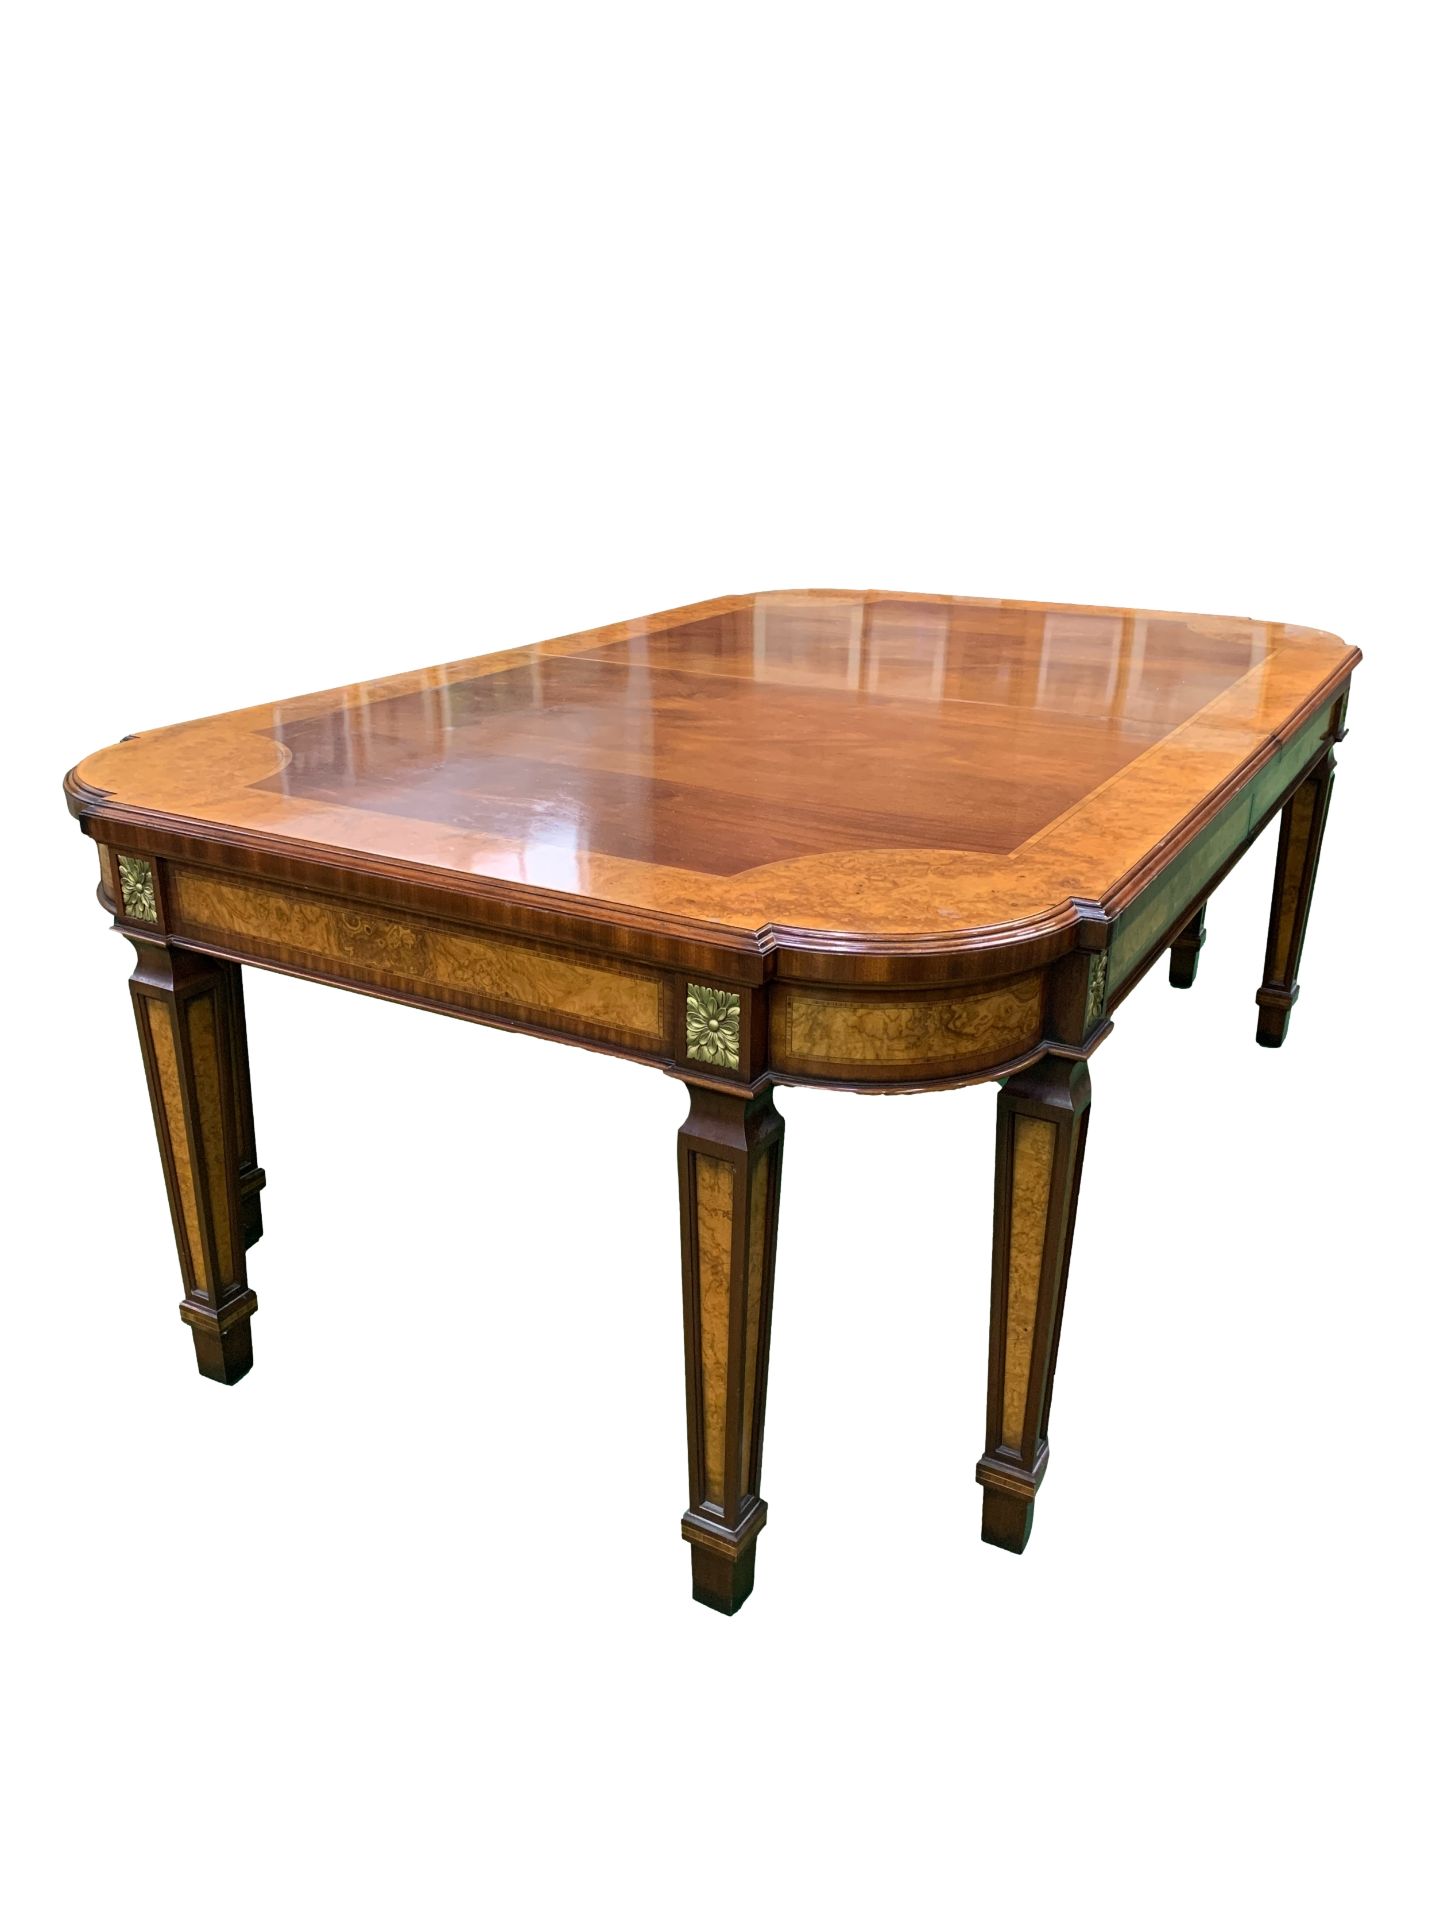 Walnut and mahogany veneer extendable dining table by Charles Barr Furniture with 10 chairs - Image 2 of 2